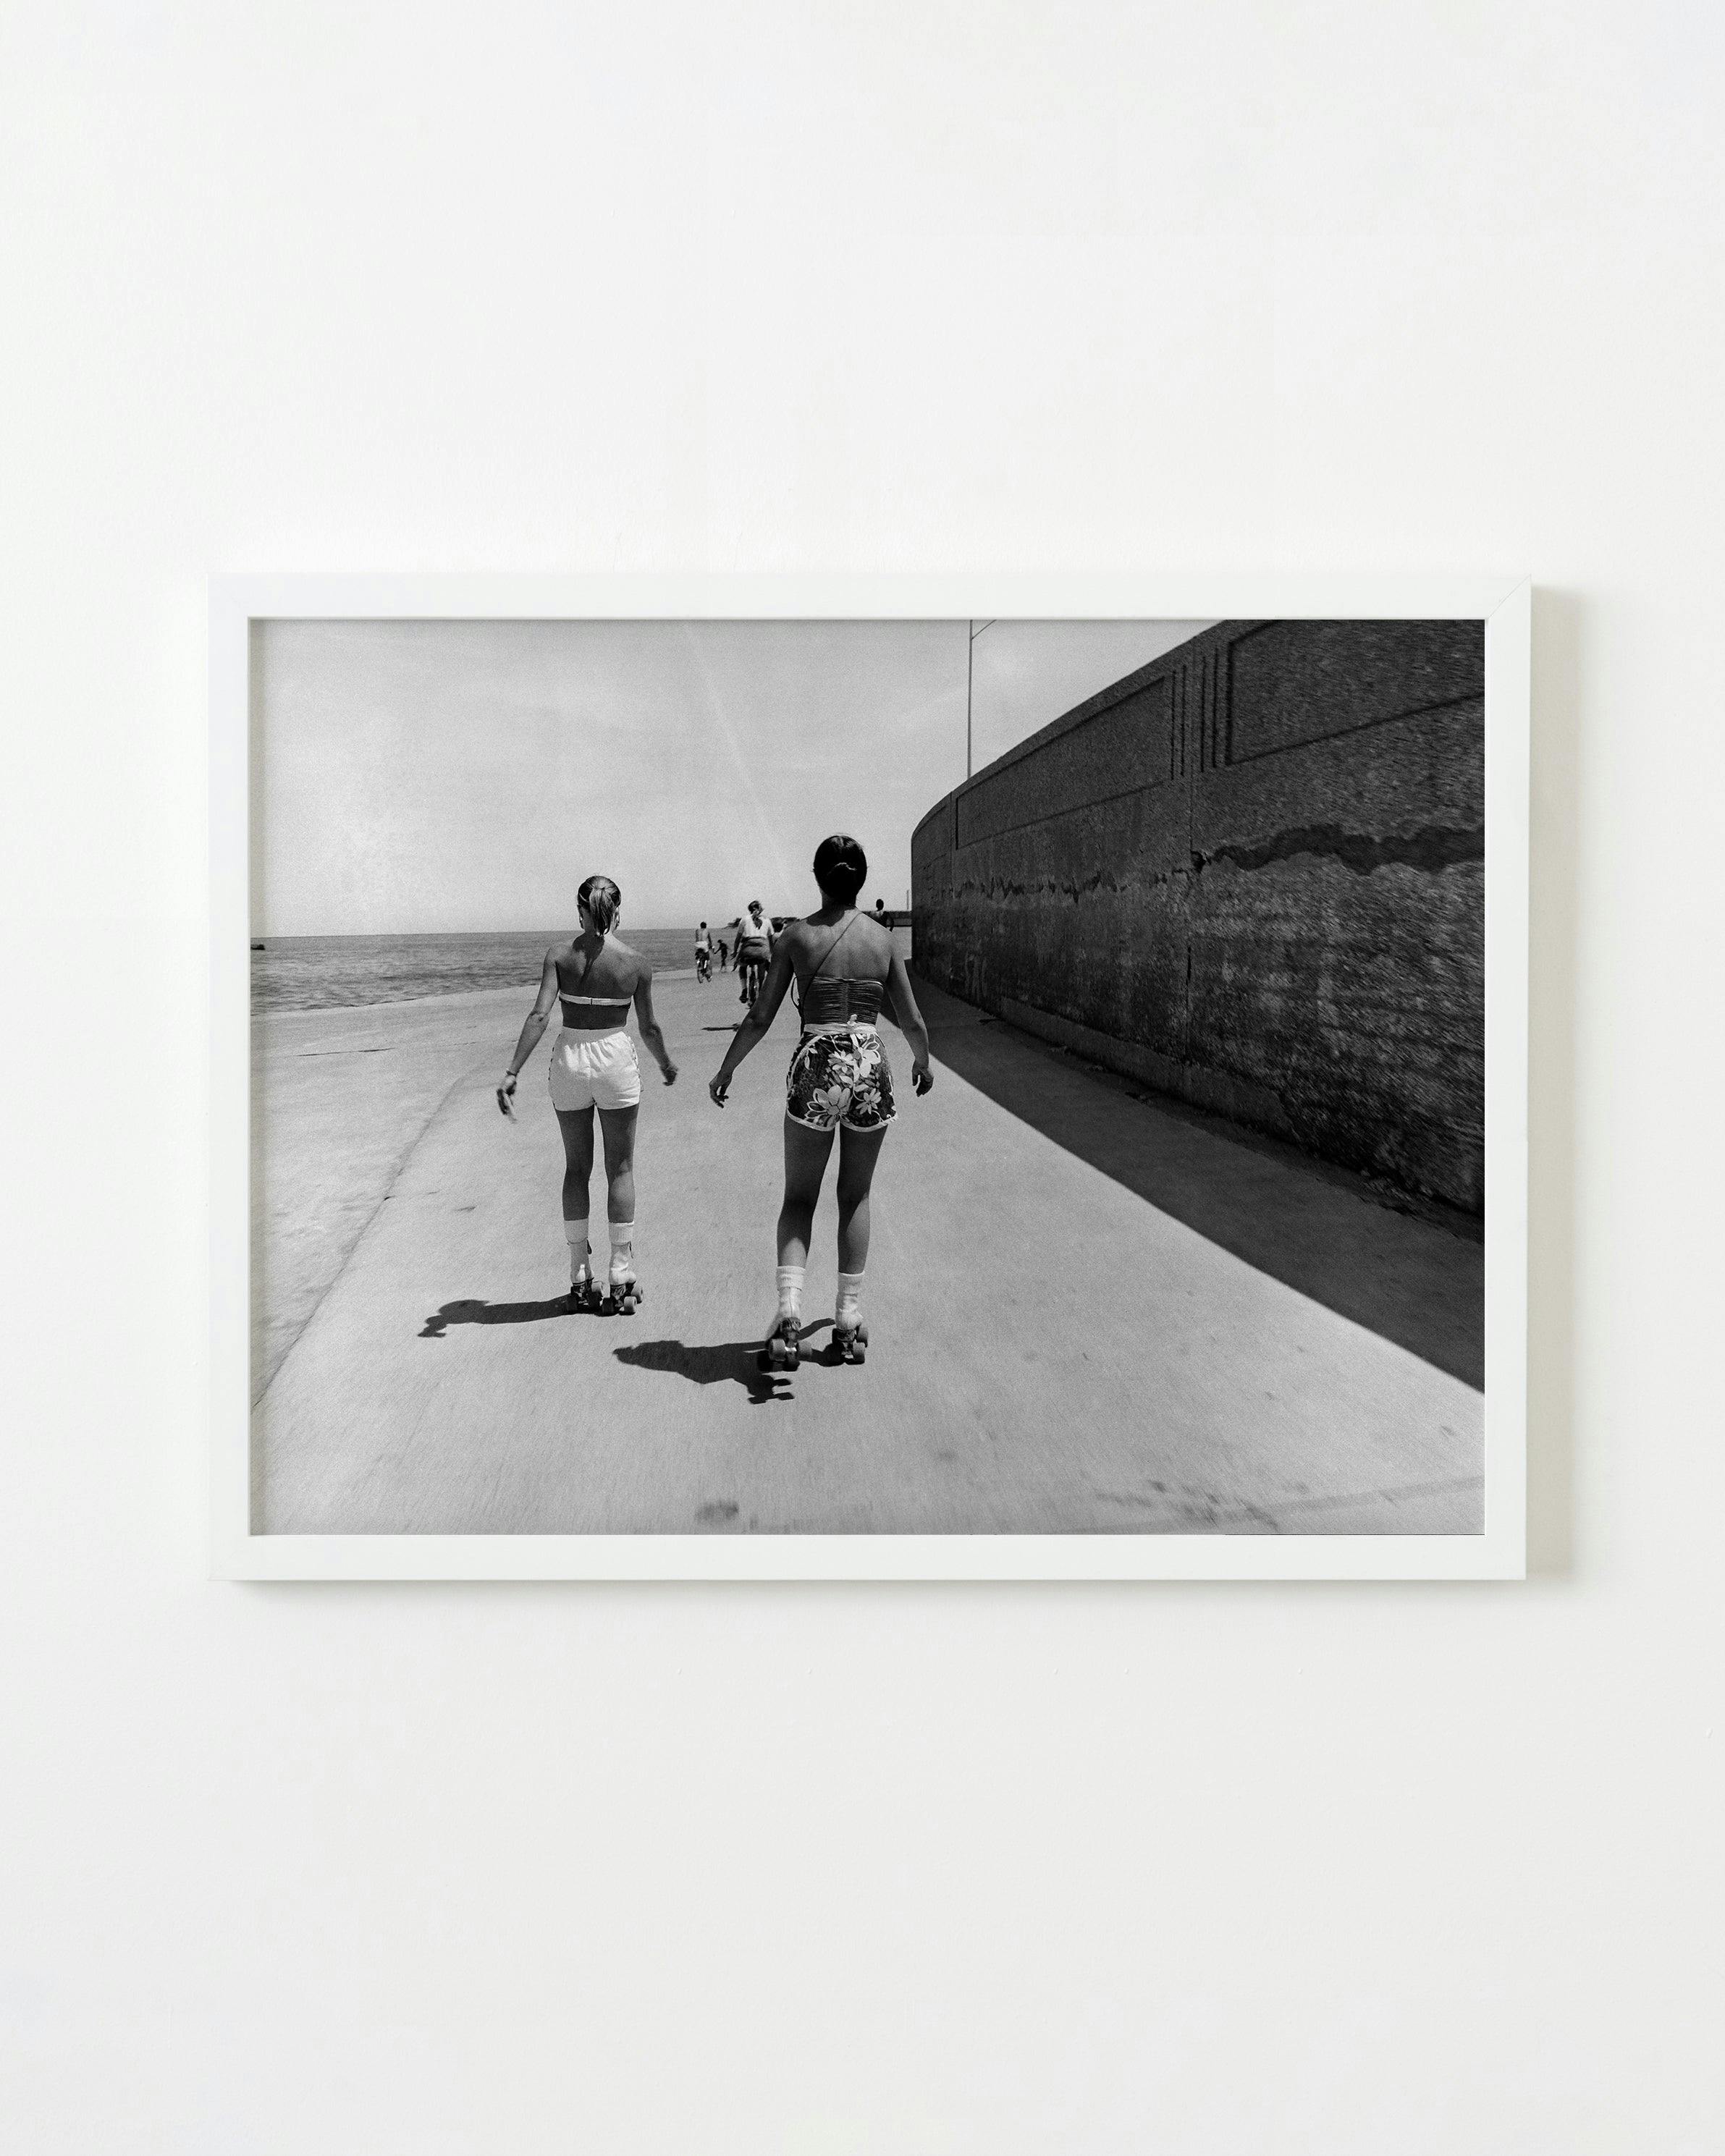 Photography by Michael Northrup titled "Lake Skaters".